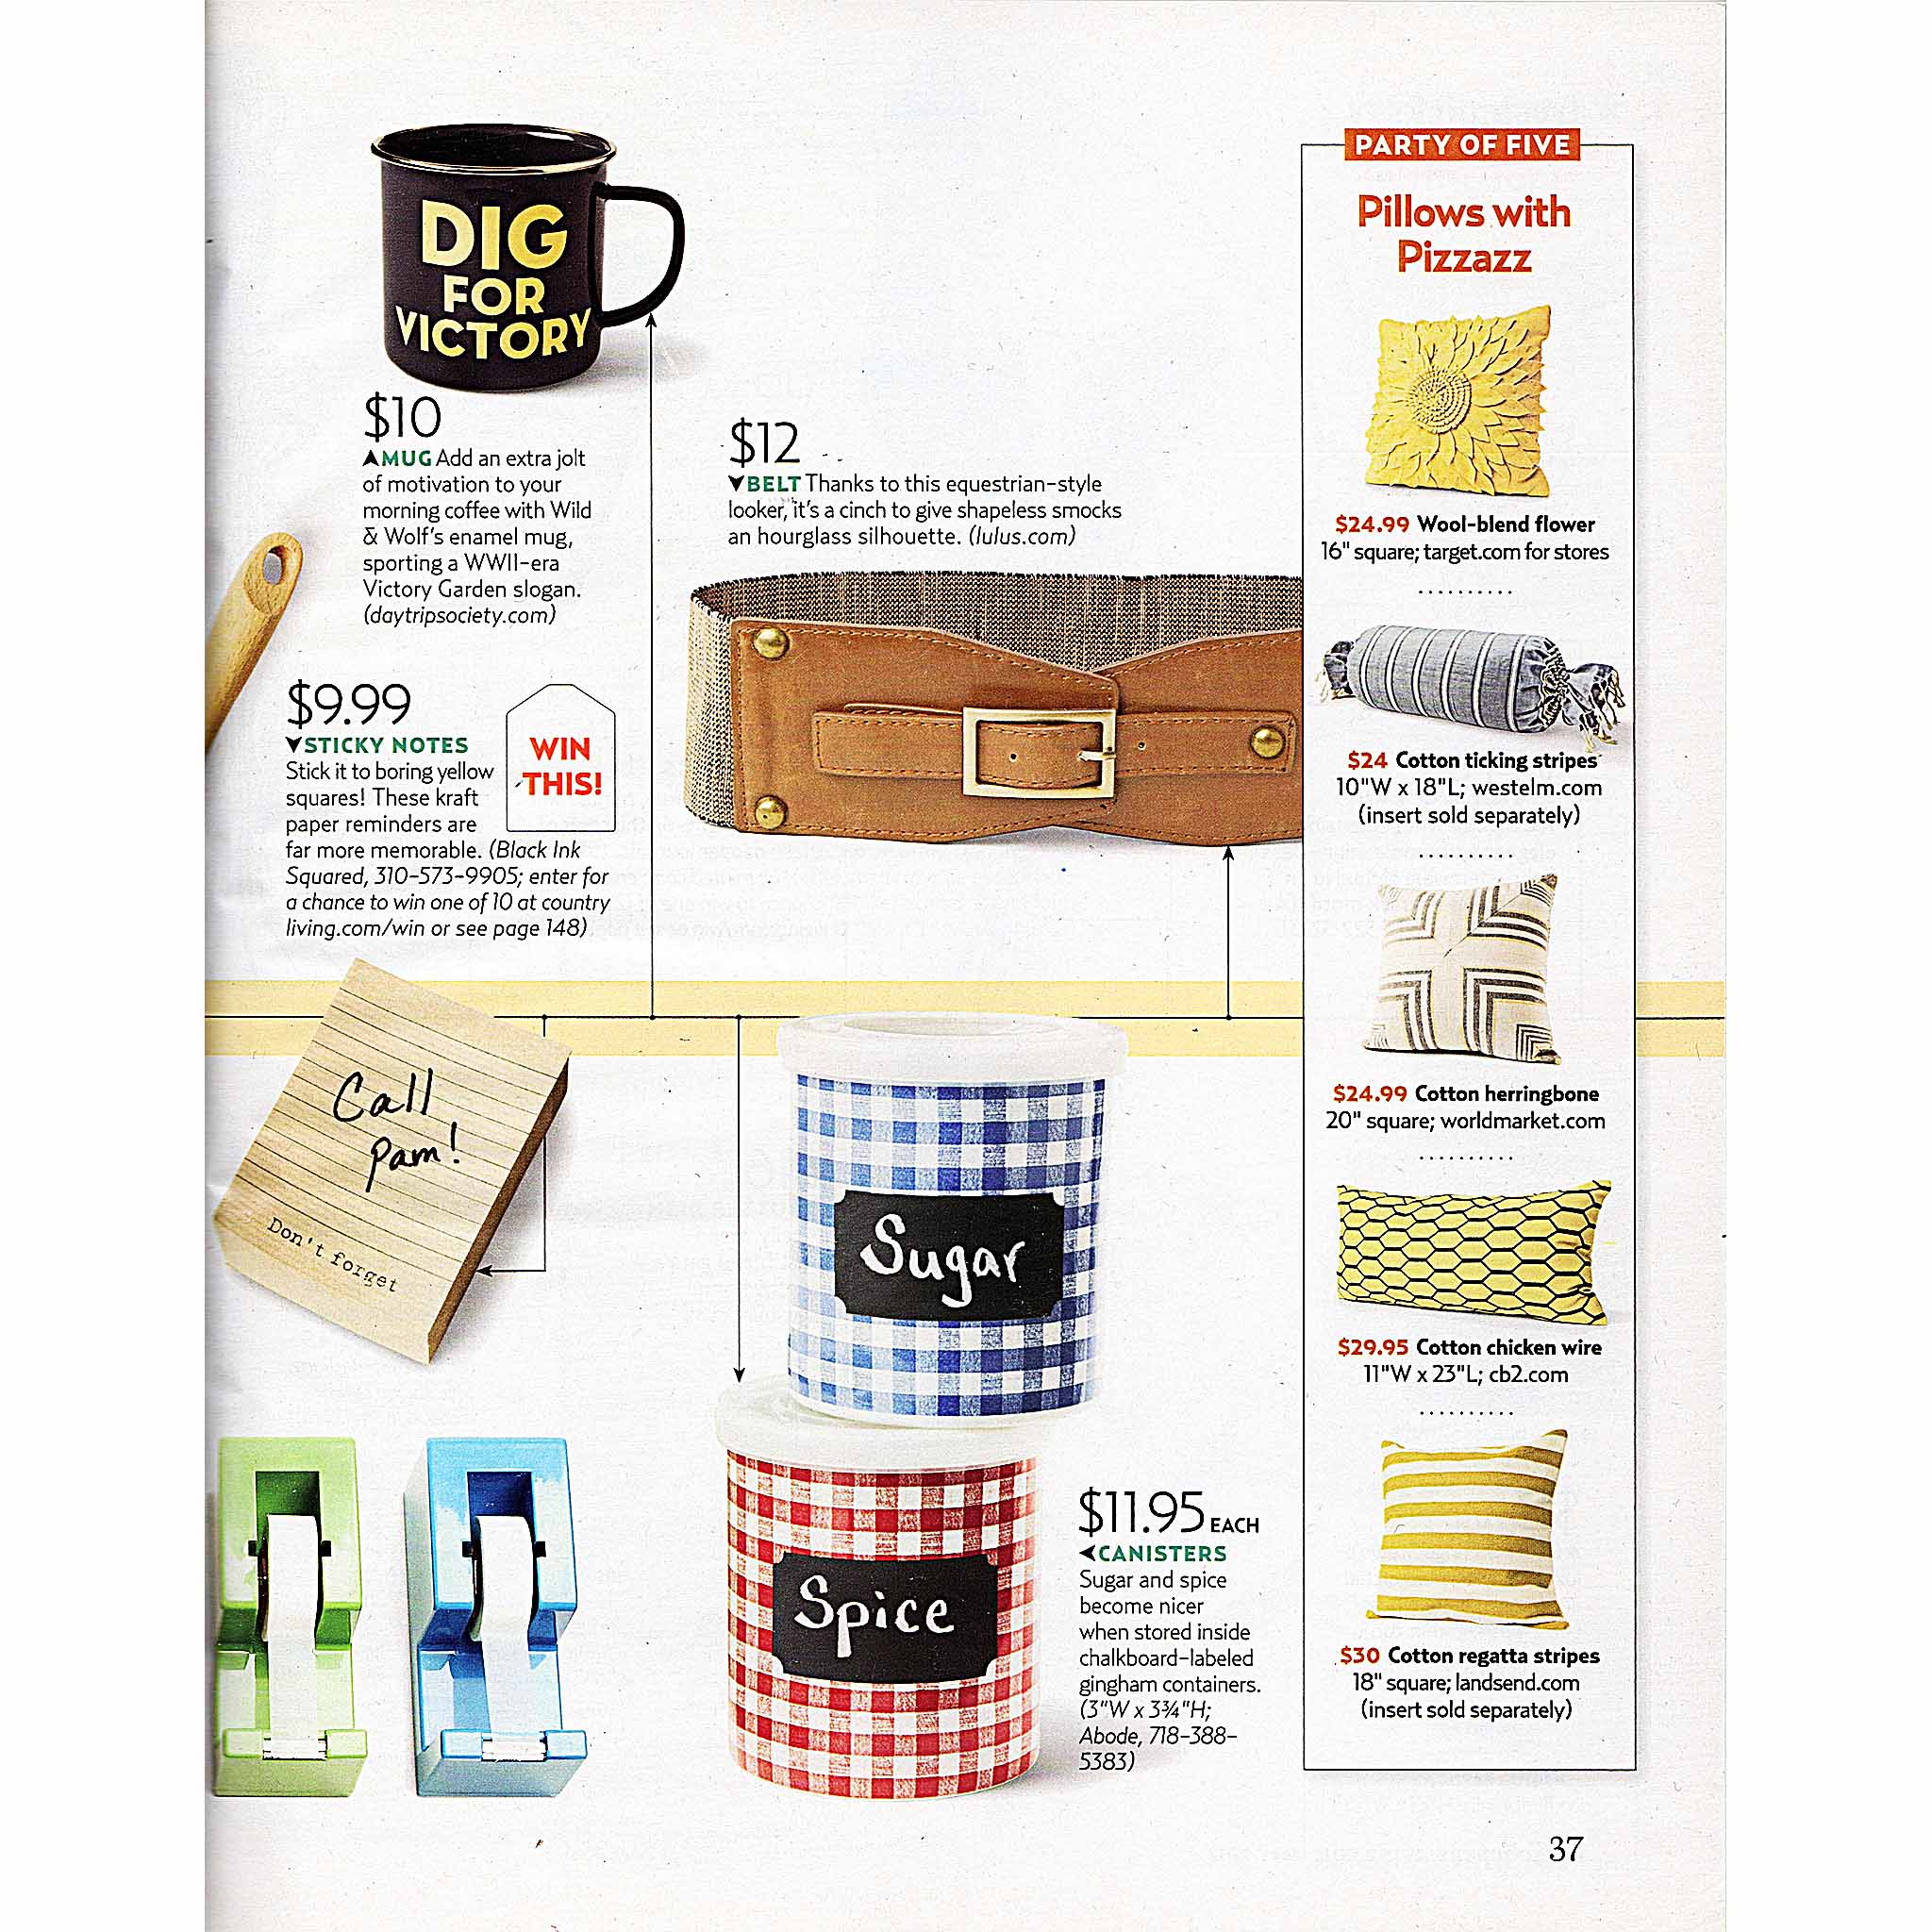 May 2012, Country Living Magazine. 50 Finds Under $50 The price of entry for this shopping roundup? A jaw-droppingly low $2.50.